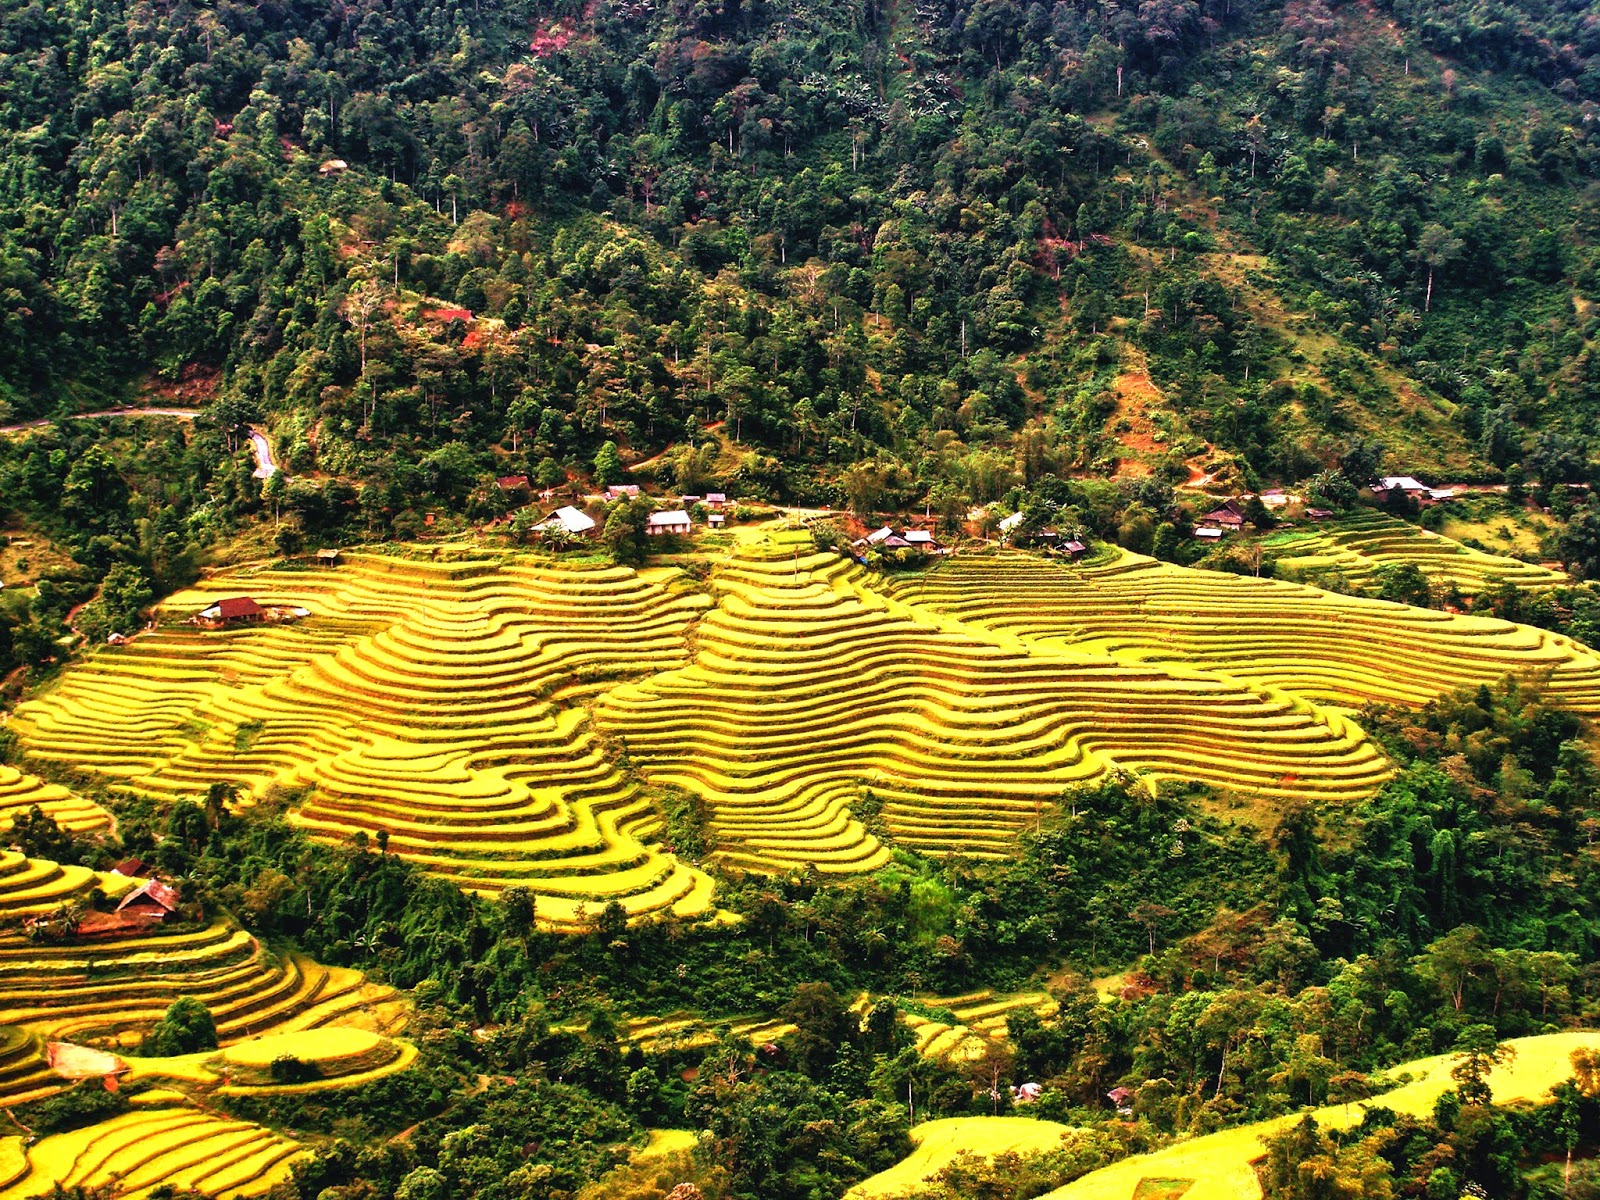 Now is best time to see ripening rice fields in Northern Vietnam